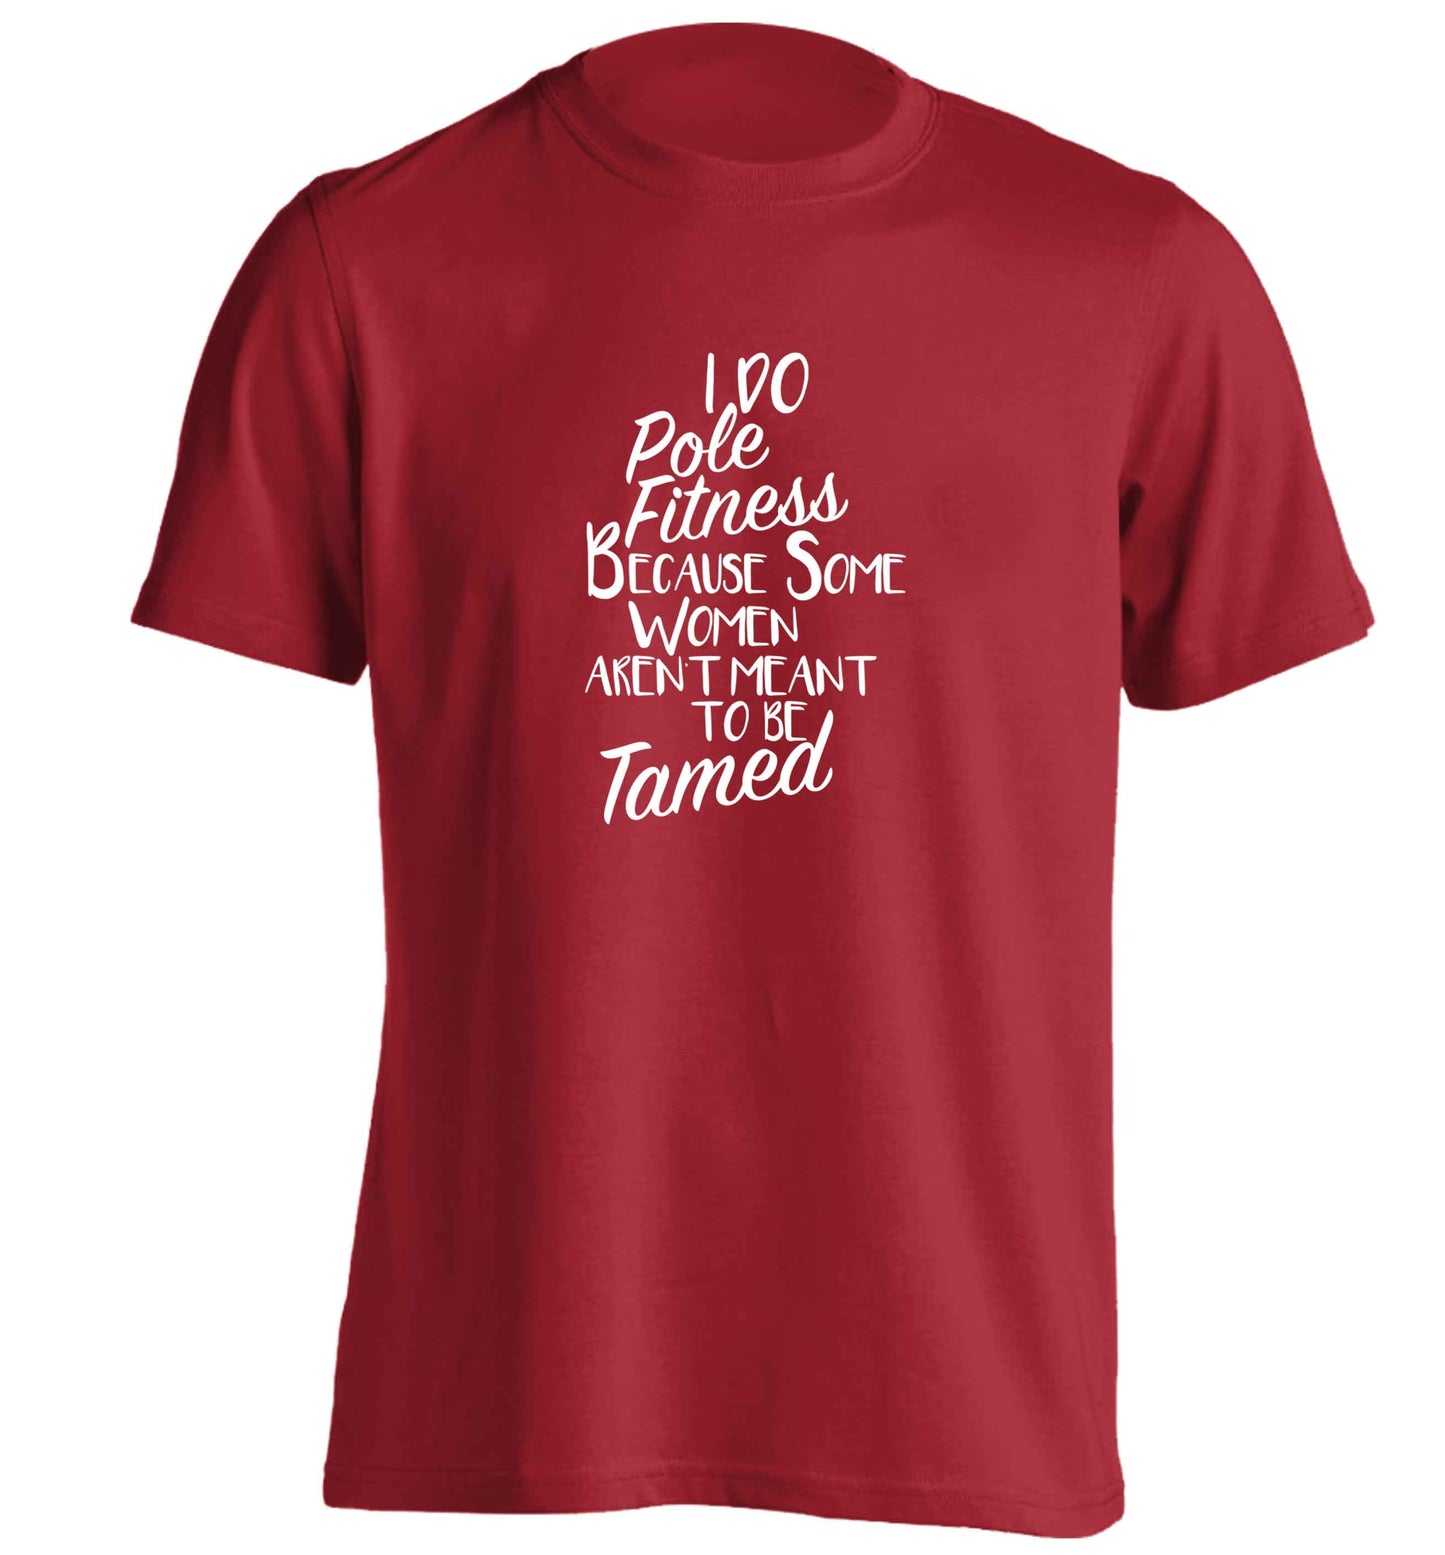 I do pole fitness because some women aren't meant to be tamed adults unisex red Tshirt 2XL